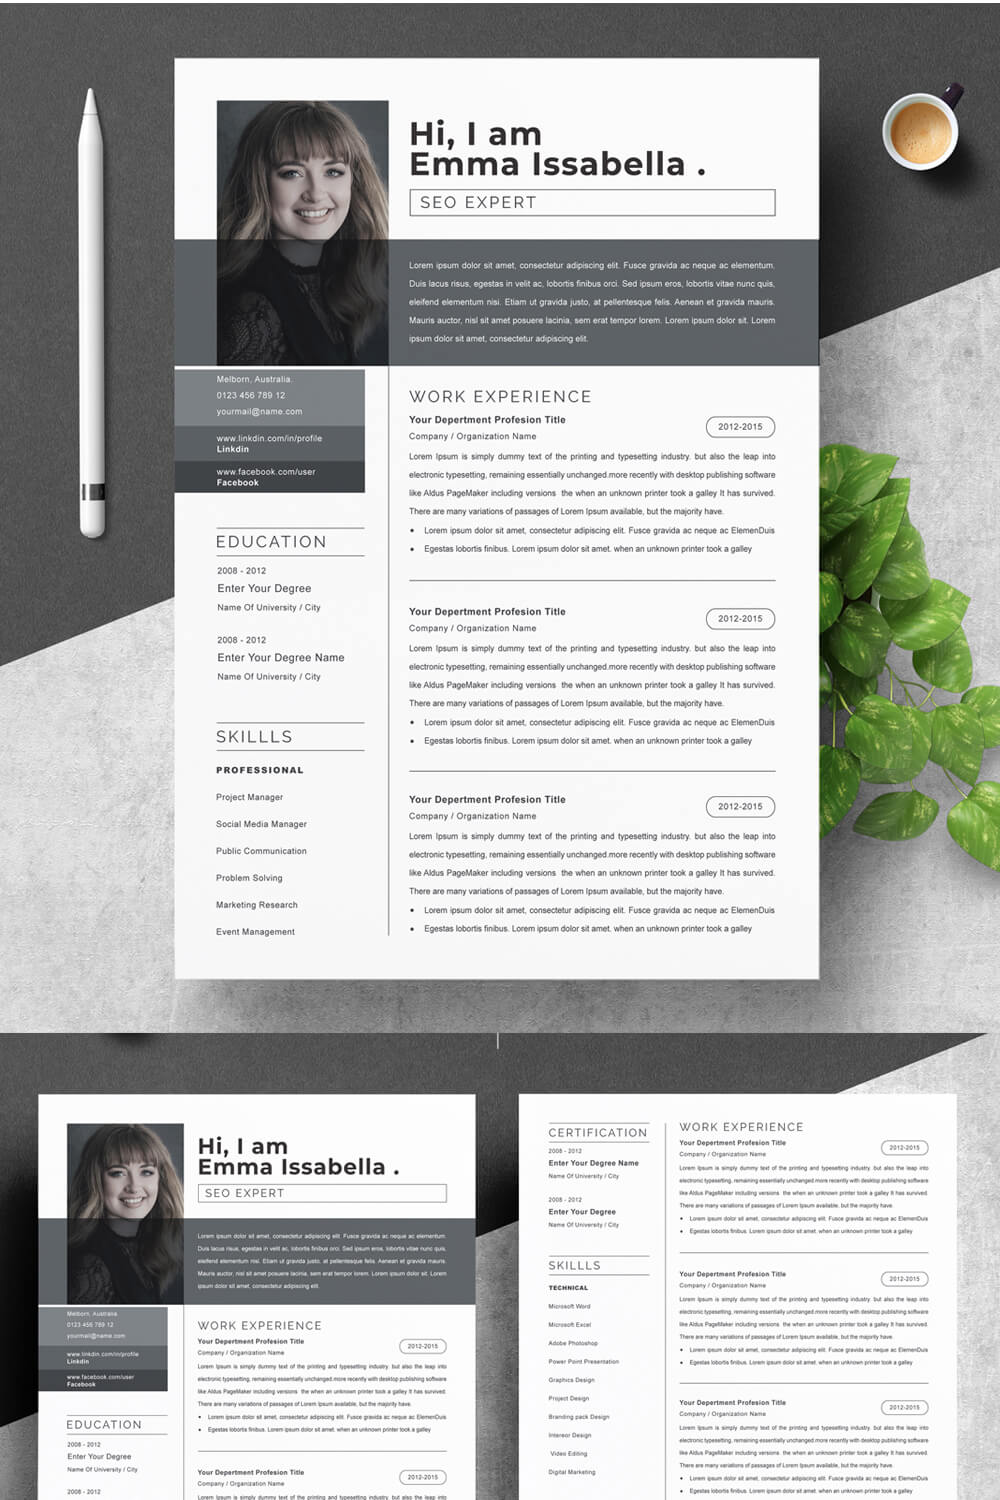 SEO Marketing Specialist | Professional Resume Template | Boost Your Career in Digital Marketing pinterest preview image.